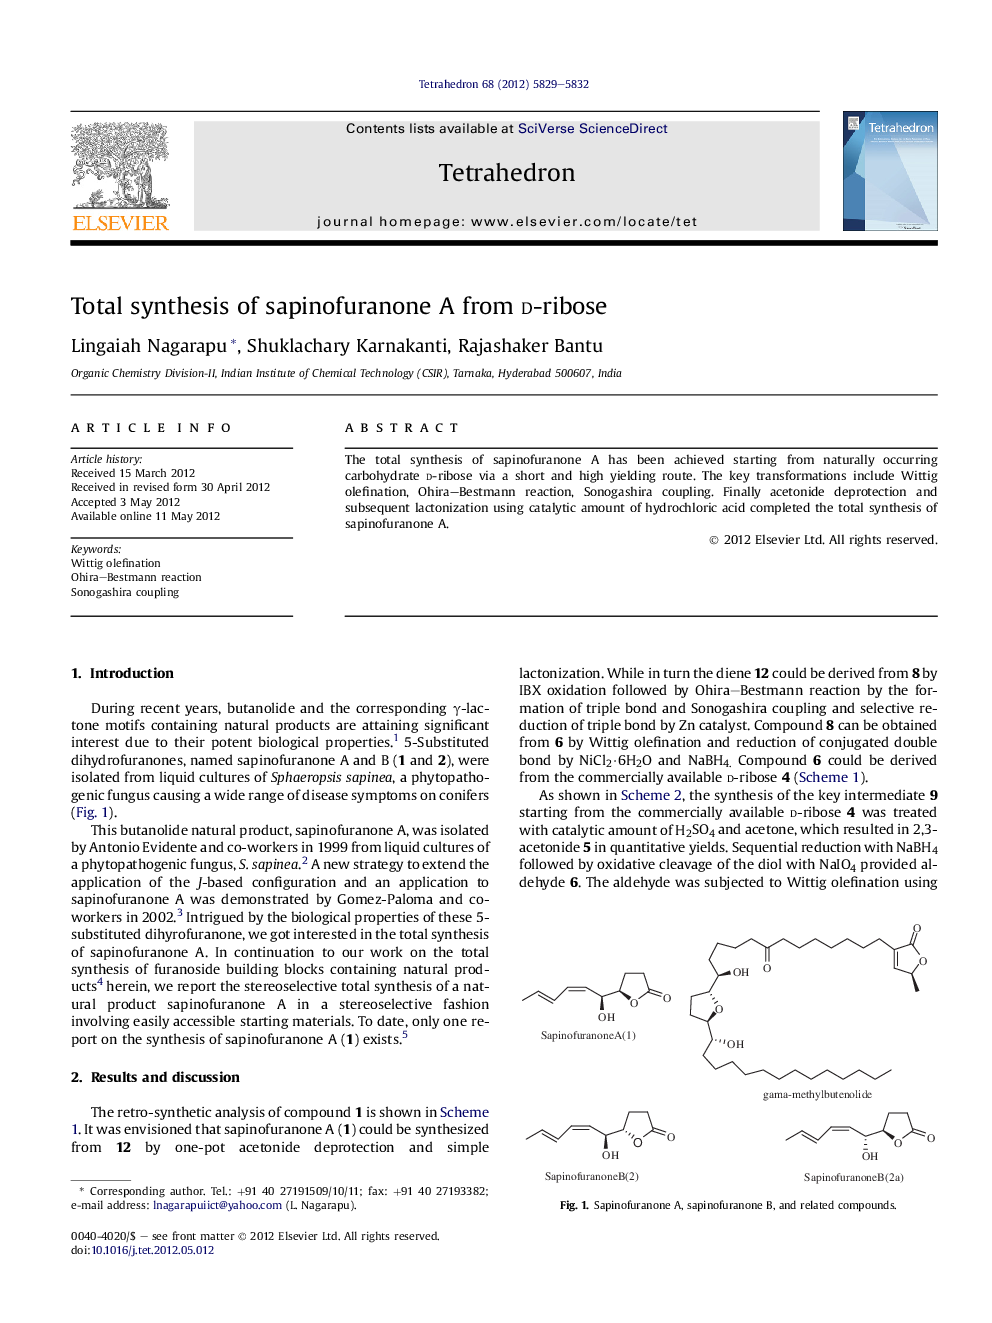 Total synthesis of sapinofuranone A from d-ribose